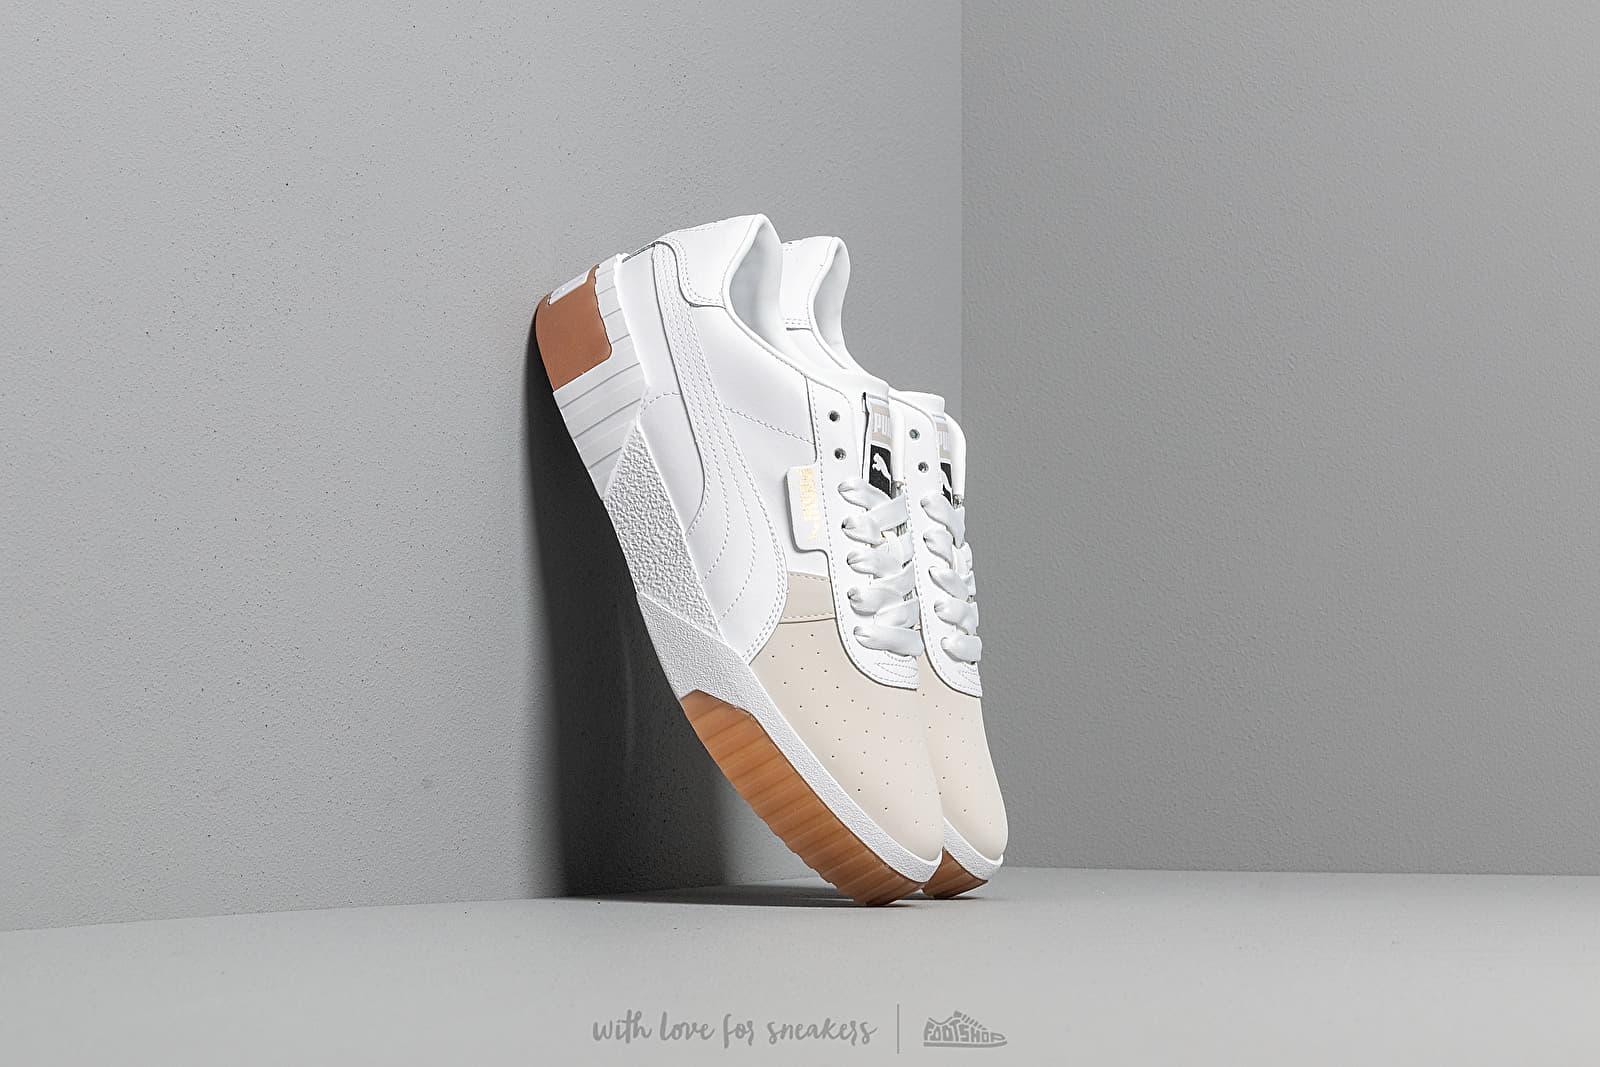 PUMA Exotic Cali Trainers With Gum Sole in White | Lyst